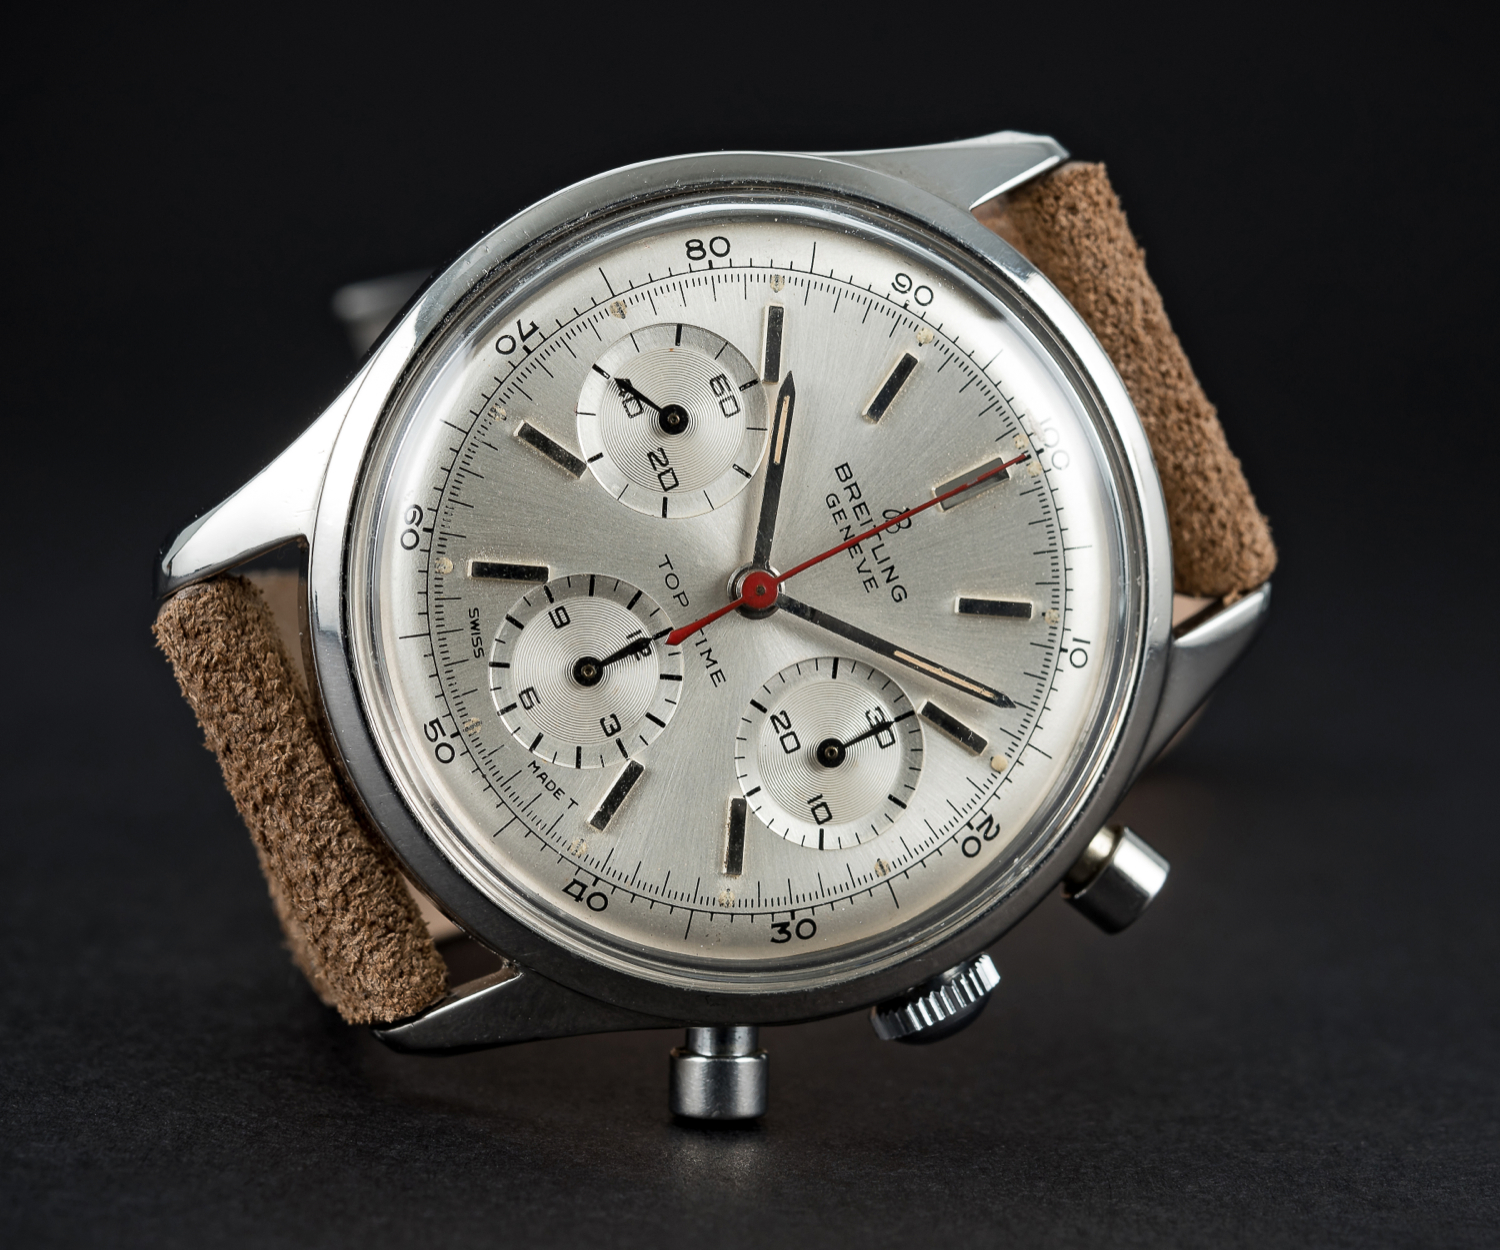 A VERY RARE GENTLEMAN'S STAINLESS STEEL BREITLING TOP TIME CHRONOGRAPH WRIST WATCH CIRCA 1964, - Image 2 of 10